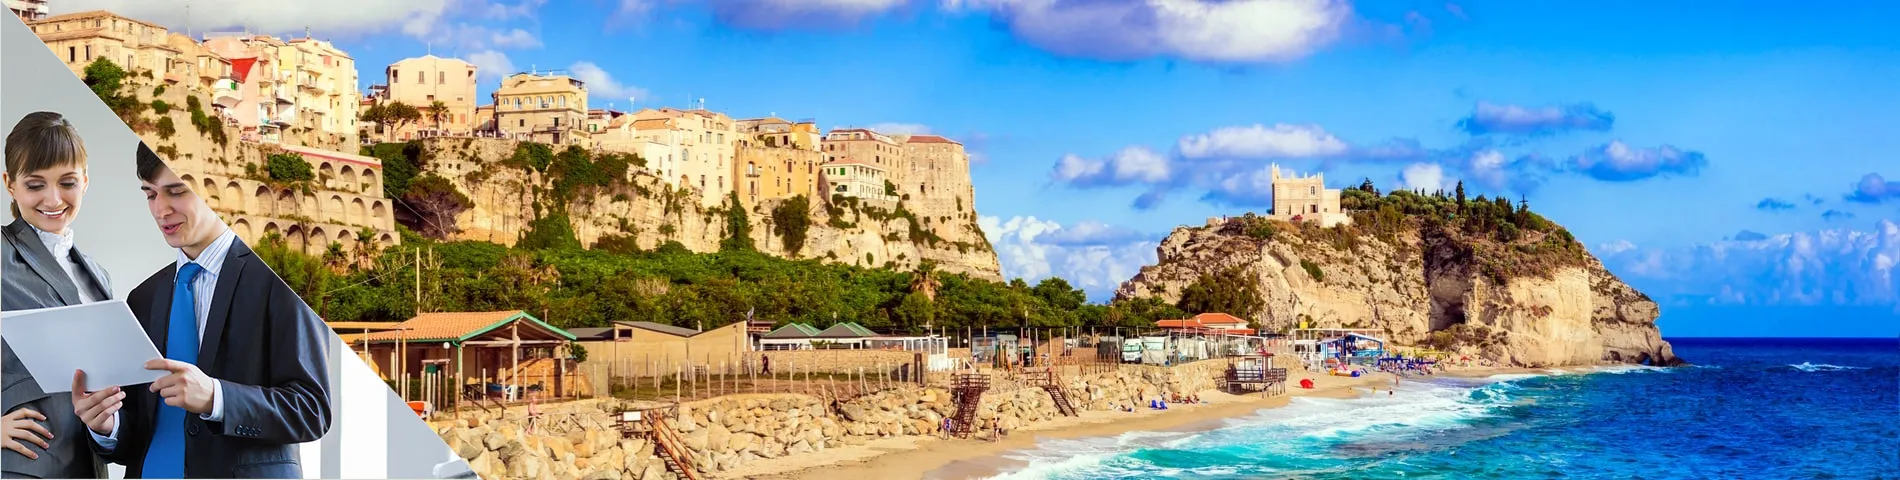 Tropea - Business One-to-One